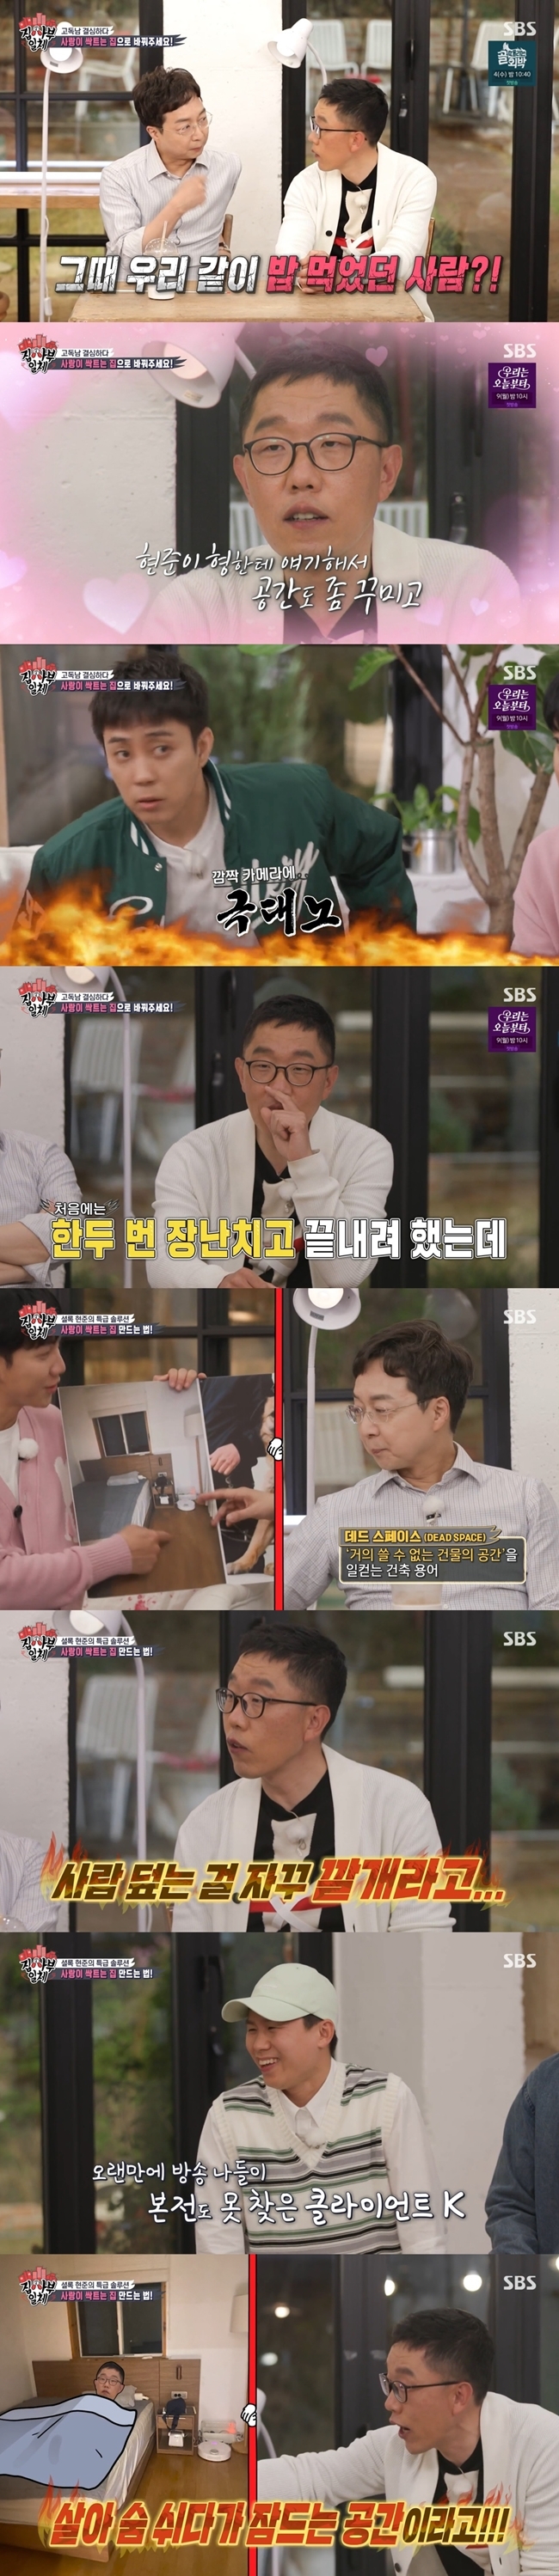 Kim Je-dong has revealed his desire to decorate a space for two people to live in.On SBS All The Butlers broadcast on May 1, Kim Je-dong commissioned his house to architect Yu hun-jun.The production team said there was a person who asked Yu hun-jun to marry.The Clients house, which was unveiled along with it, was placed on a large bed with only one pillow, causing sweat.Yu hyun-jun also said, It seems so lonely that the bed is attached to one side is that I live alone.Lee Seung-gi questioned, Who is there if you have commissioned a newlywed house? Kim Min-gyu predicted, Is not it yet before we join together?The Client identity was Kim Je-dong, who said, I am releasing my girlfriend is about the level of marriage announcement.Kim Je-dong and close yu hun-jun were also surprised, saying, Is there real?But Kim Je-dongs words were a lie: I tried to finish it once or twice, but I missed the timing because I was happy with the win. Eun Ji-won said, Are you crazy?, Lee Seung-gi laughed with anger, saying, I see the truth for a long time. Kim Je-dong said, I was sincere about consulting, and I agree with how to transform the space of 14 pyeong into a space where two people live.Yu hun-jun looked at Kim Je-dongs bedroom and diagnosed it as this is dead space; Kim Je-dong said, I call people and say its a dead space.Im talking about the house where they live, Lee Seung-gi said, What happened when the braking came out in three years? Yu hun-jun said, I think I can get a space where I can drink tea by moving the garden sideways and planting trees.Kim Je-dong said, I want to do this, I am growing vegetables in the garden. He said he did not want to get rid of the garden.So you hun-jun said, You have to empty mine and leave room for others to fill in. To be a couple, you have to change the direction of the bed.We need to make sure that both sides come out. 